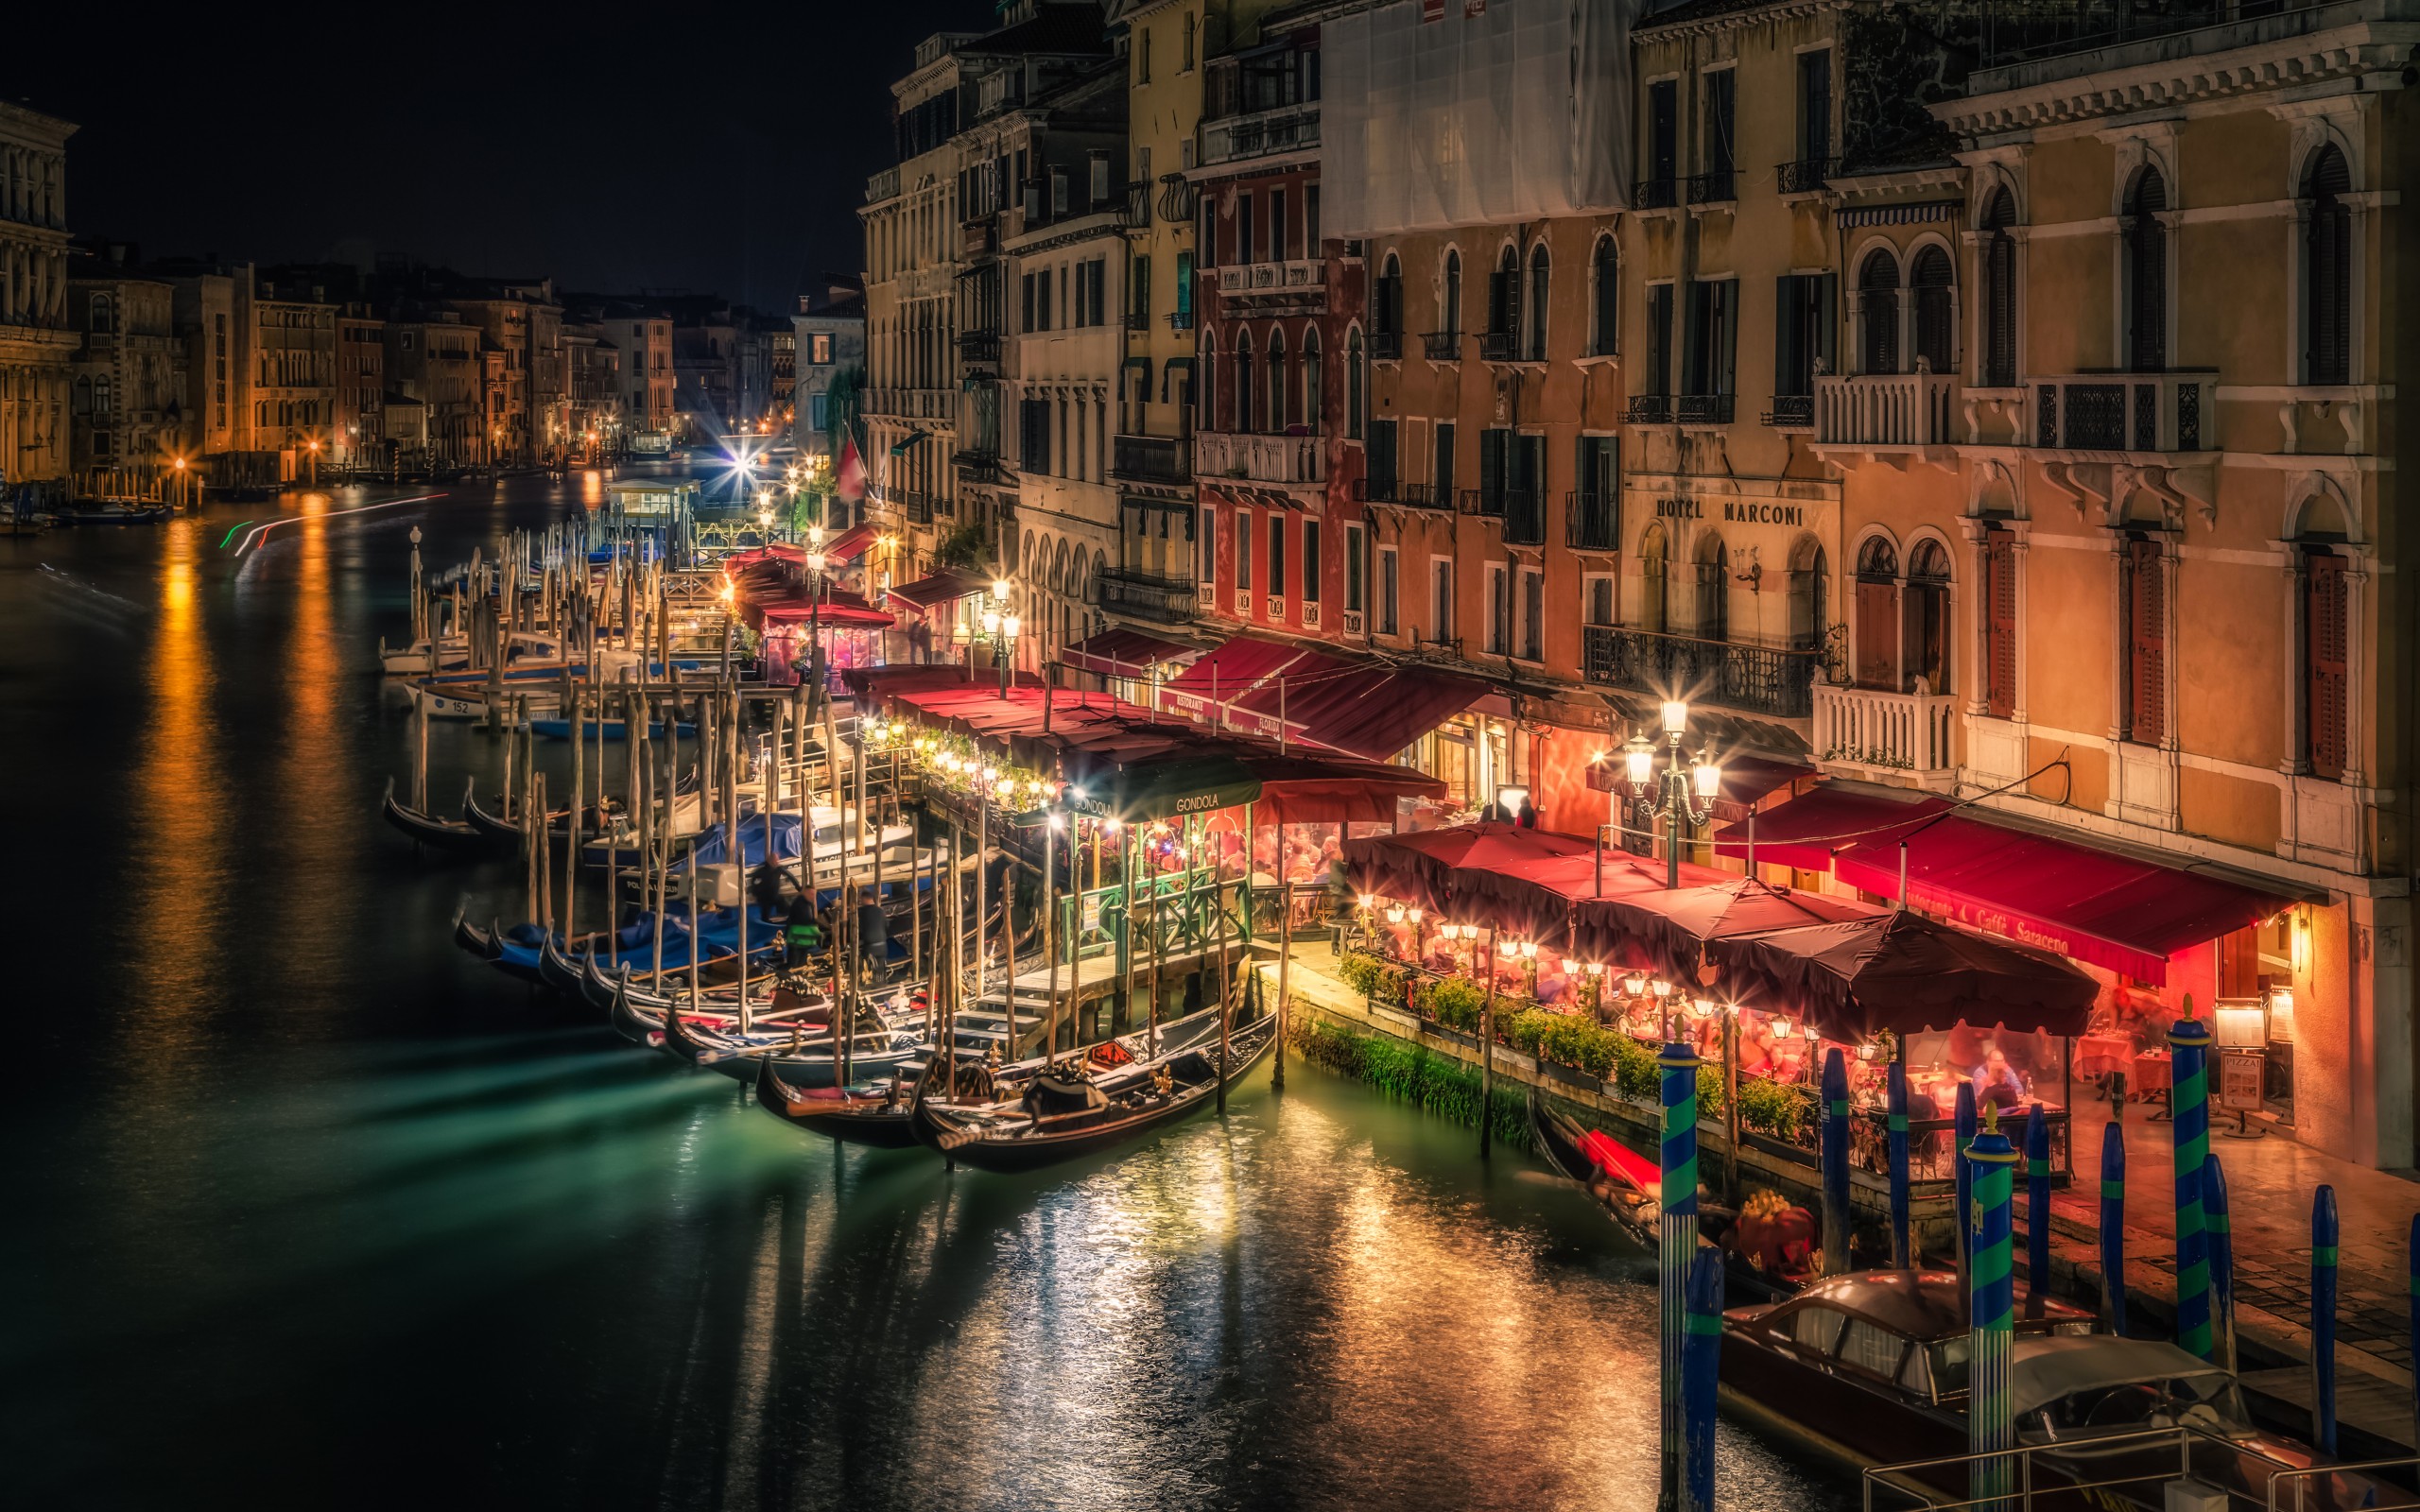 venice, man made, boat, building, canal, evening, gondola, night, town, cities